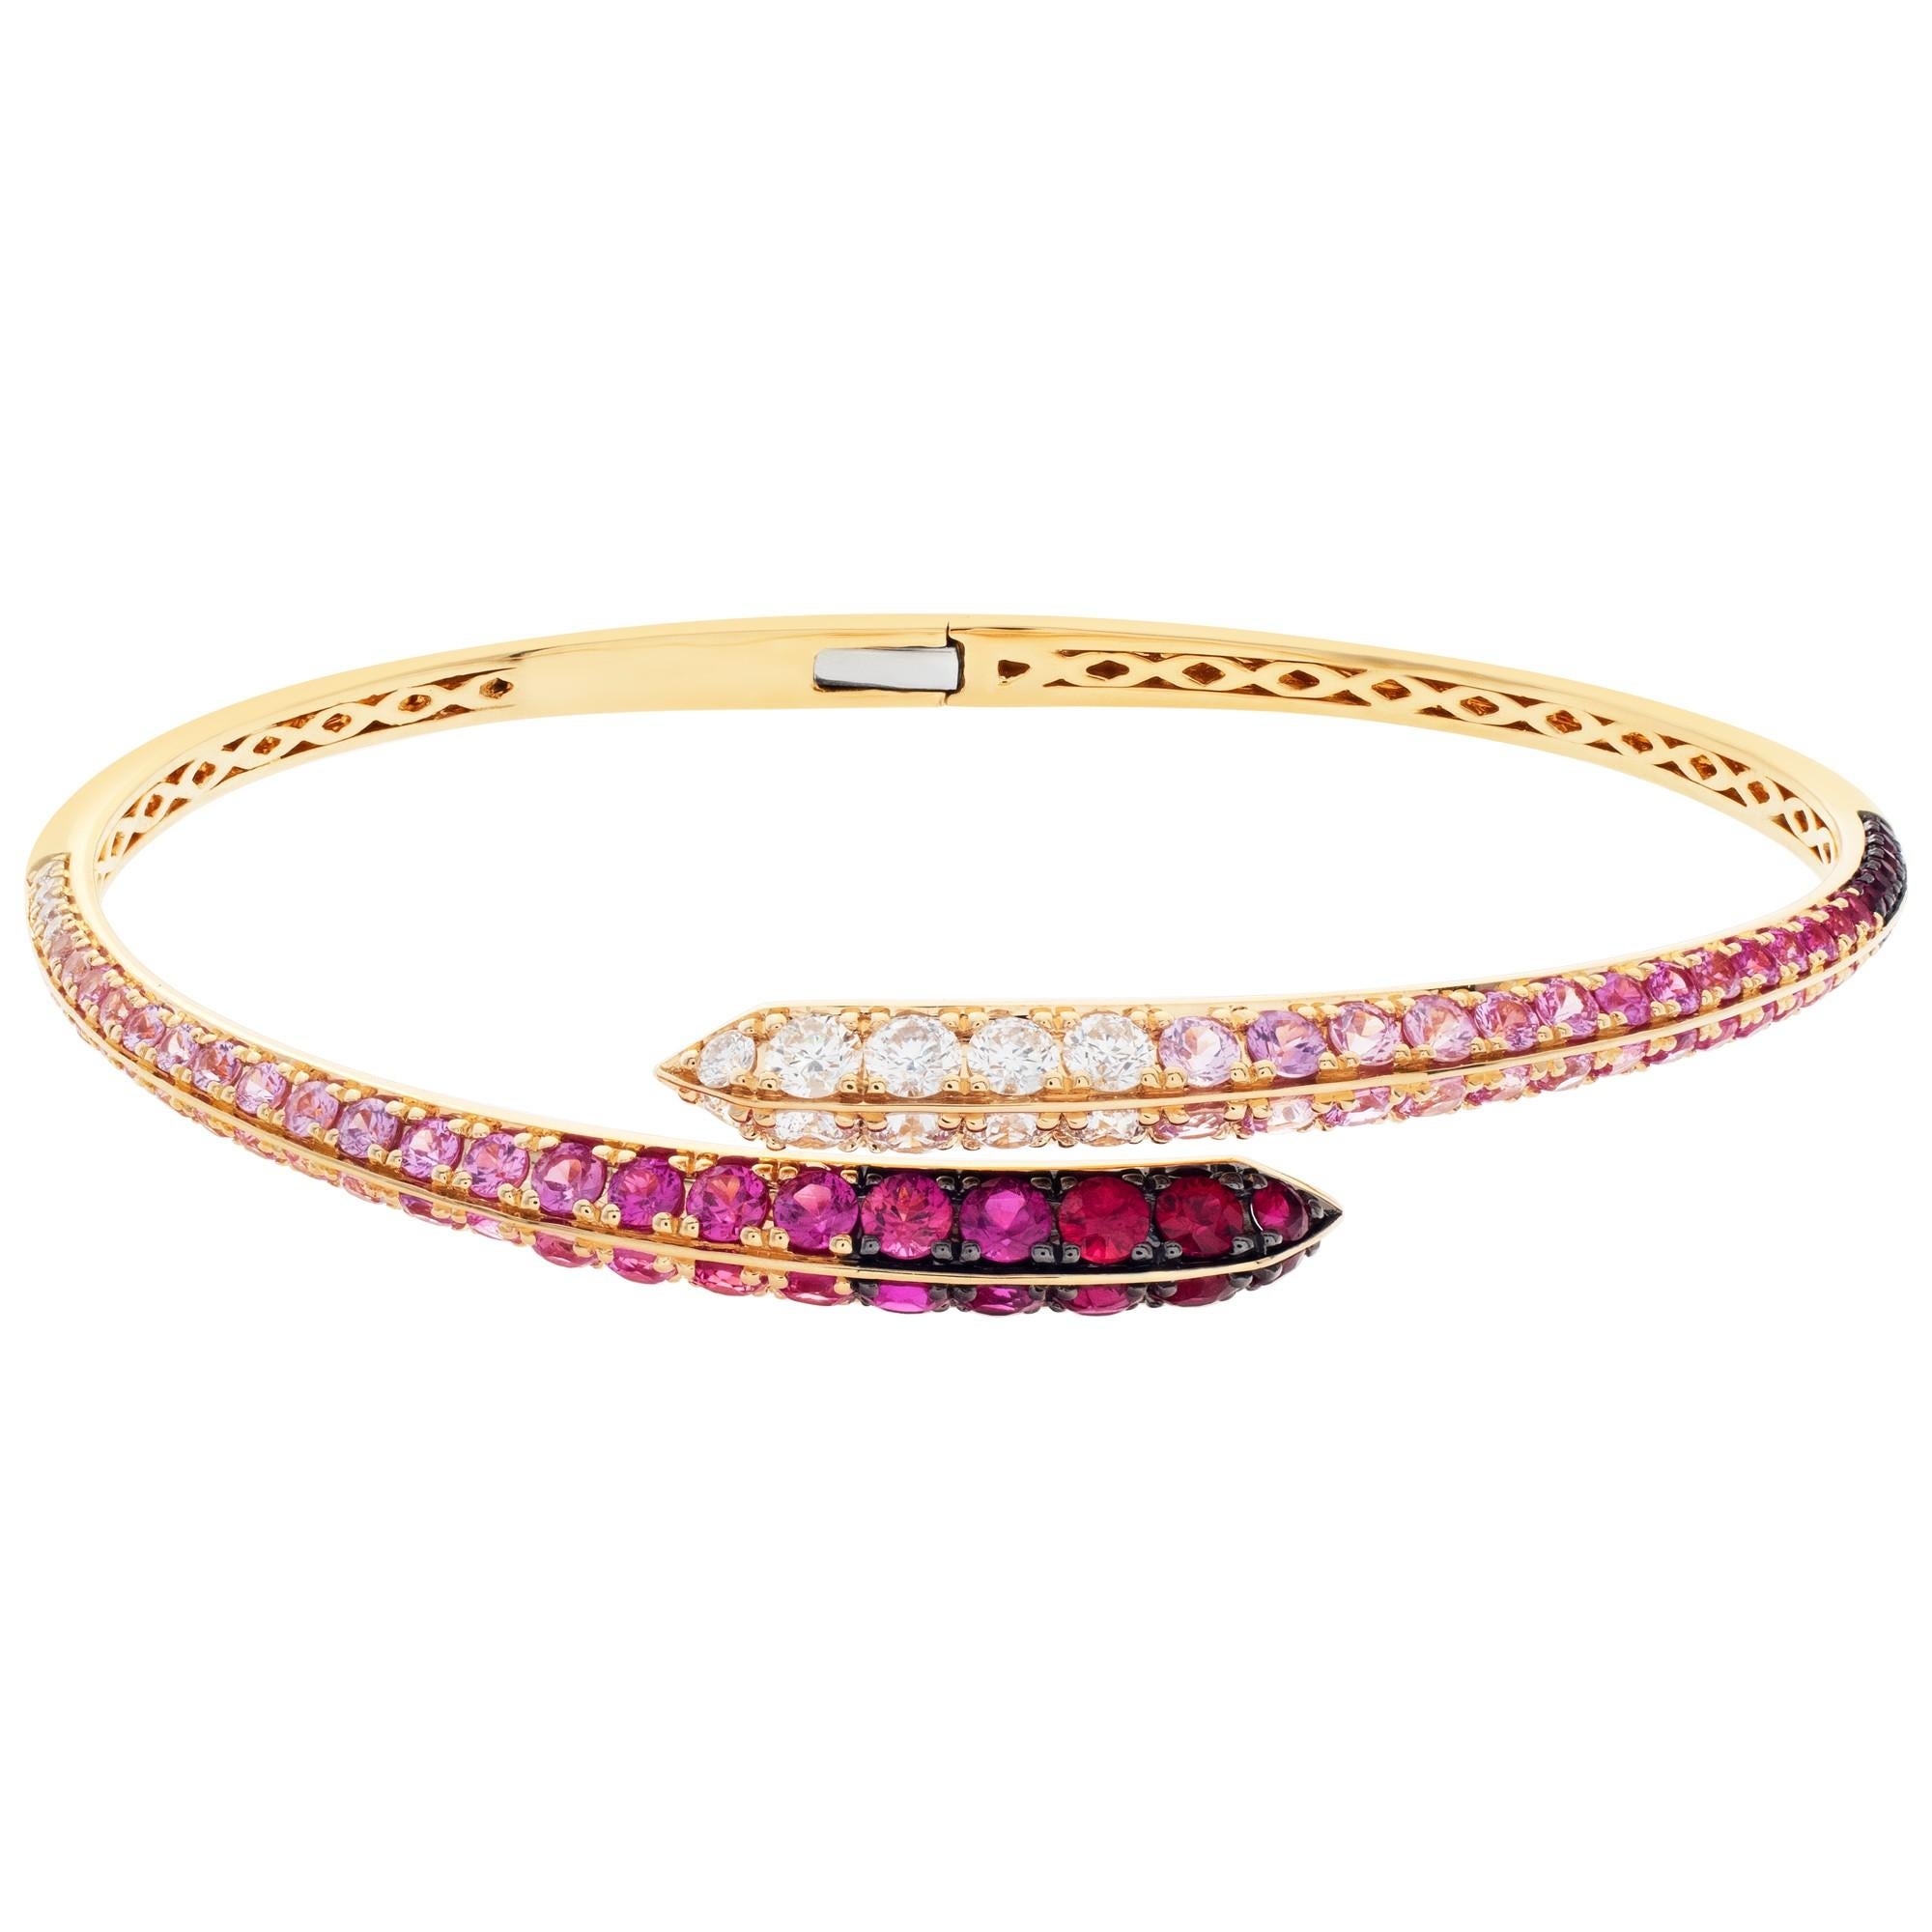 ESTIMATED RETAIL: $10,260.00
YOUR PRICE: $7,392.00

Gorgeous bangle with diamonds, rubies & pink sapphires set in 18K gold. Diamonds approx. total weight: 0.86 carat. 
Graduated hues of pink sapphire, total approx. weight: 3.10 carats
Rubies total